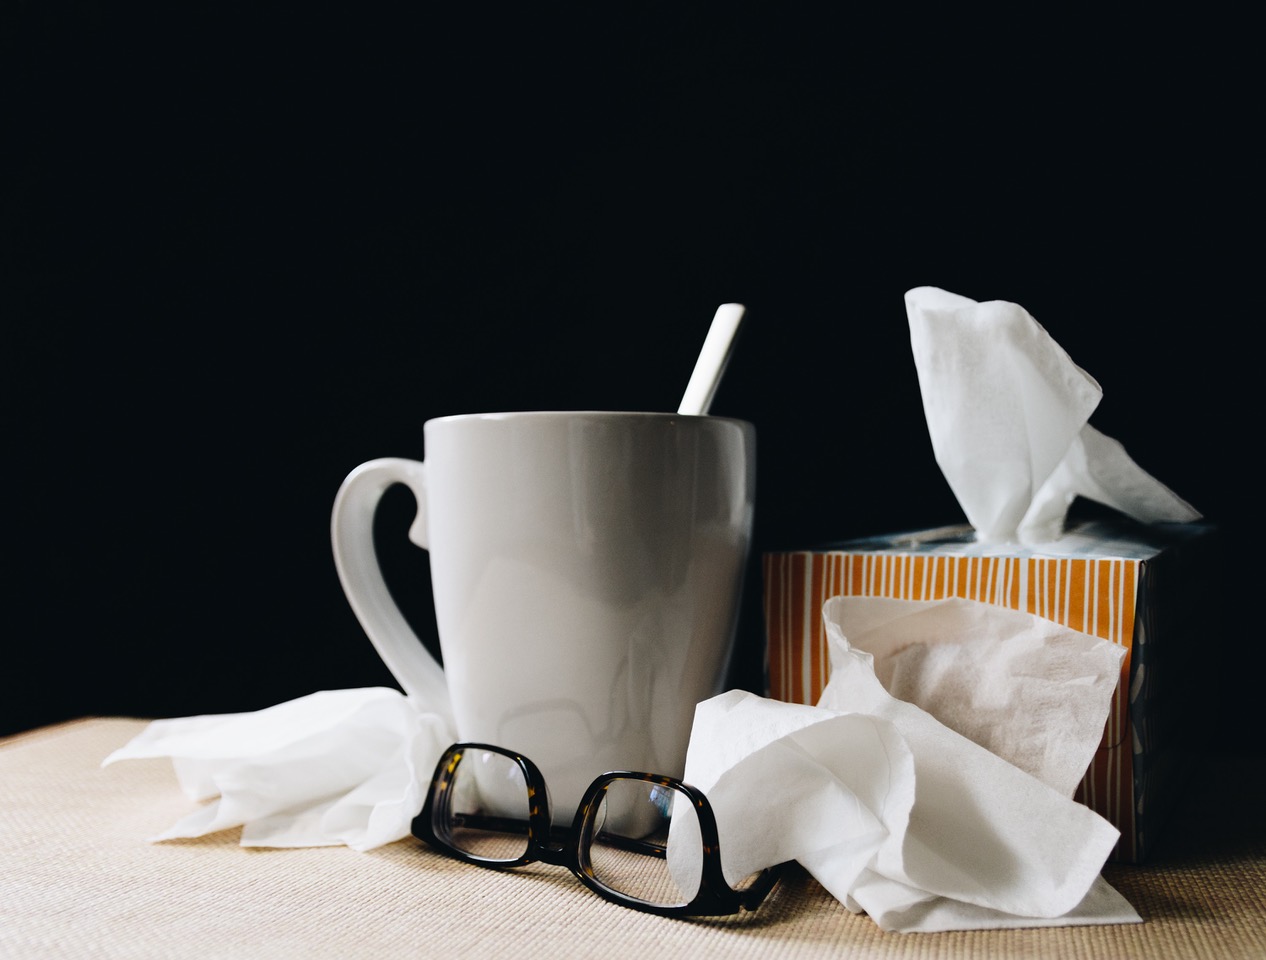 Can You Prevent The Flu?